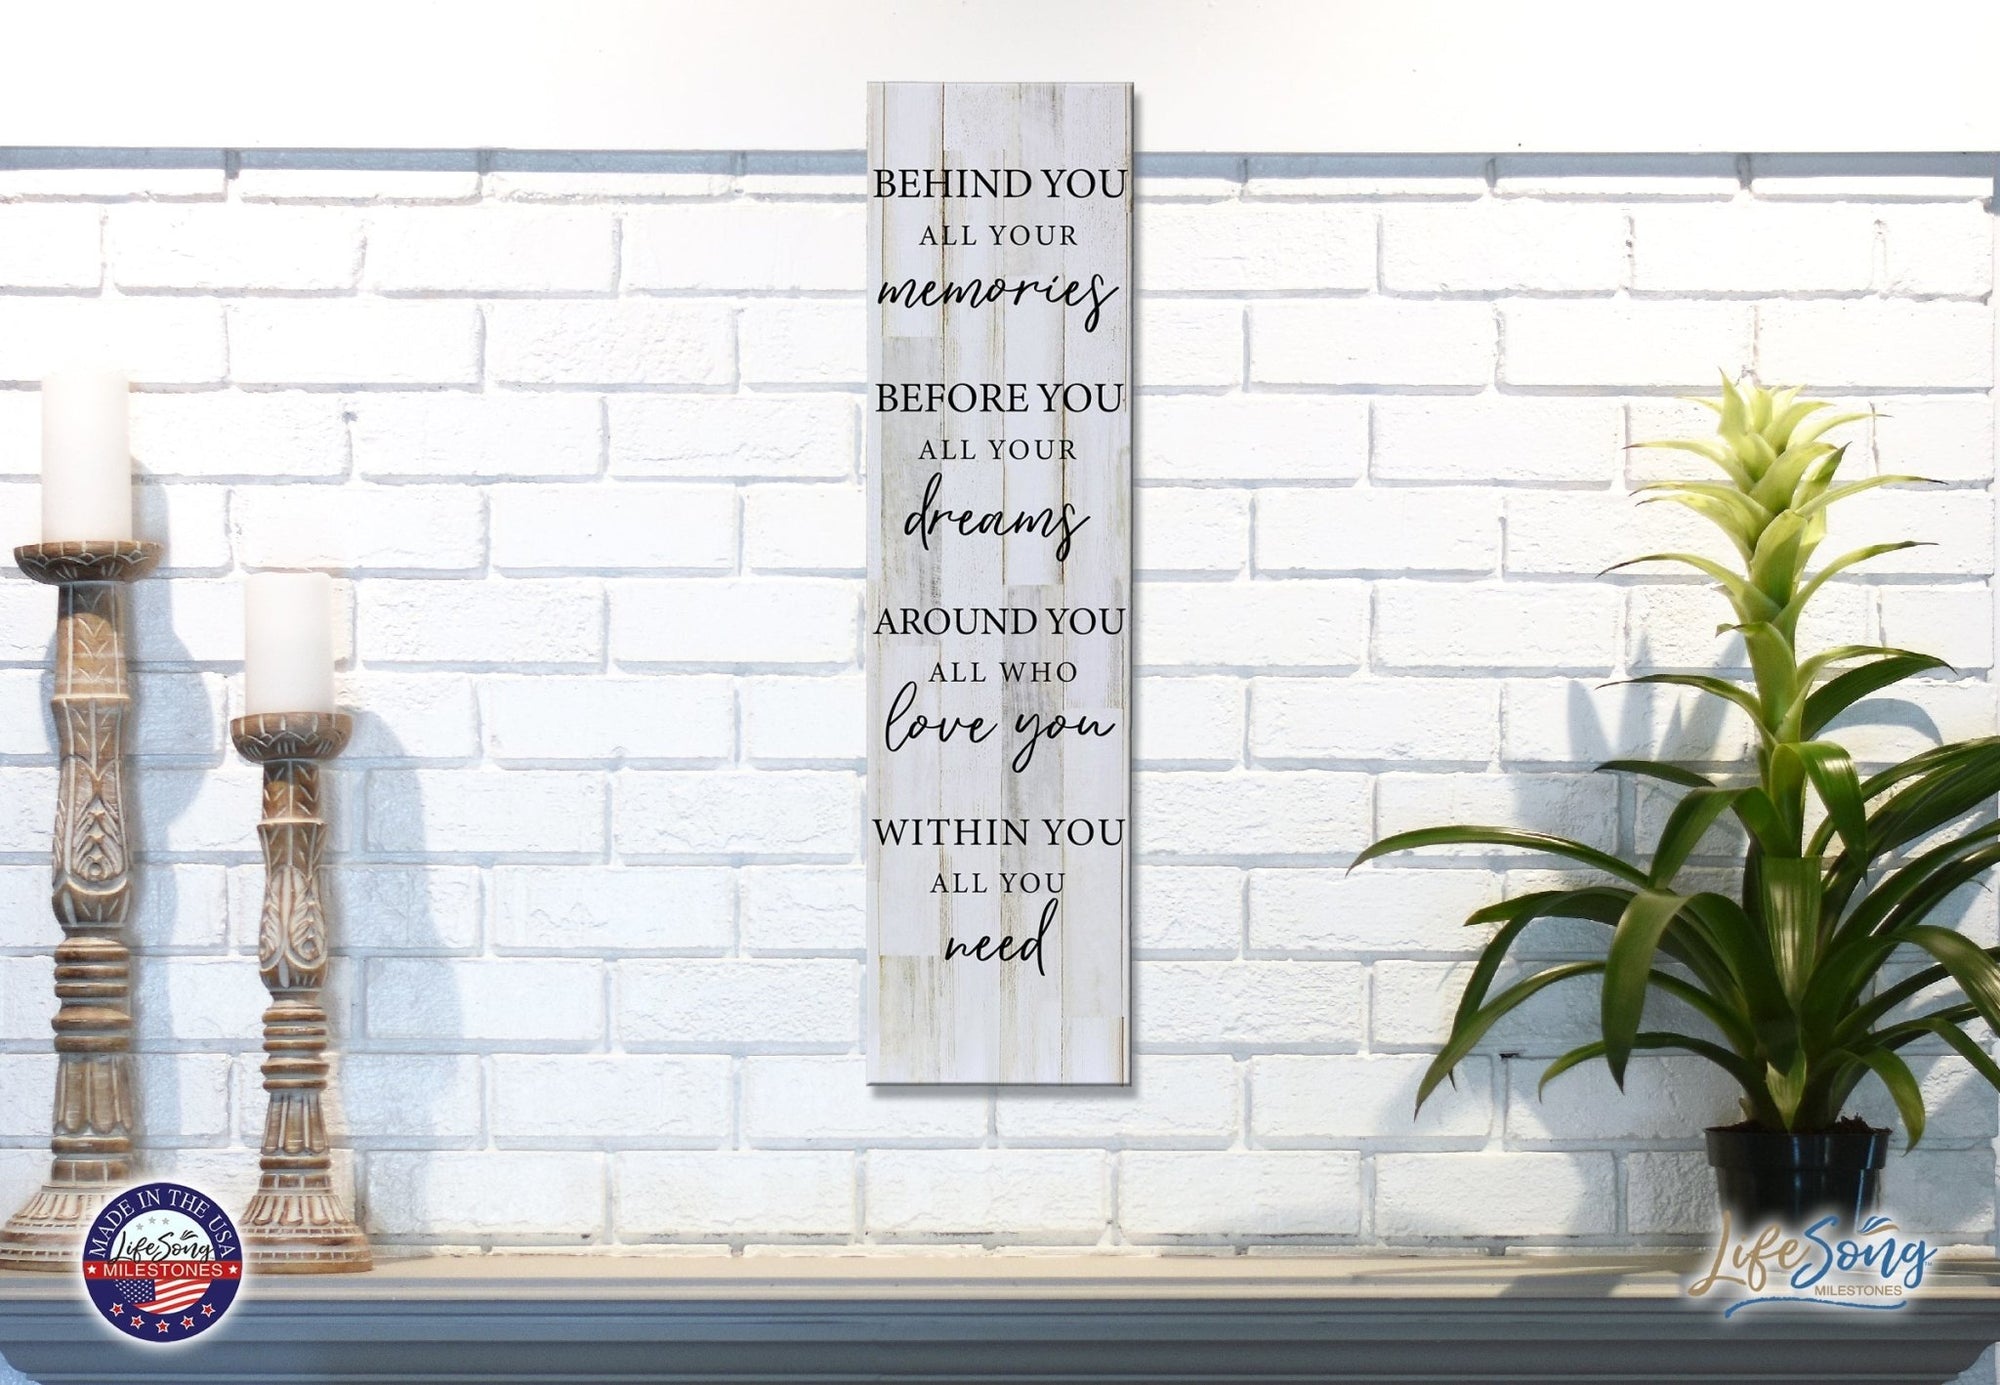 Inspirational Modern Wooden Wall Hanging Plaque 10x40 - Behind You All Your Memories - LifeSong Milestones